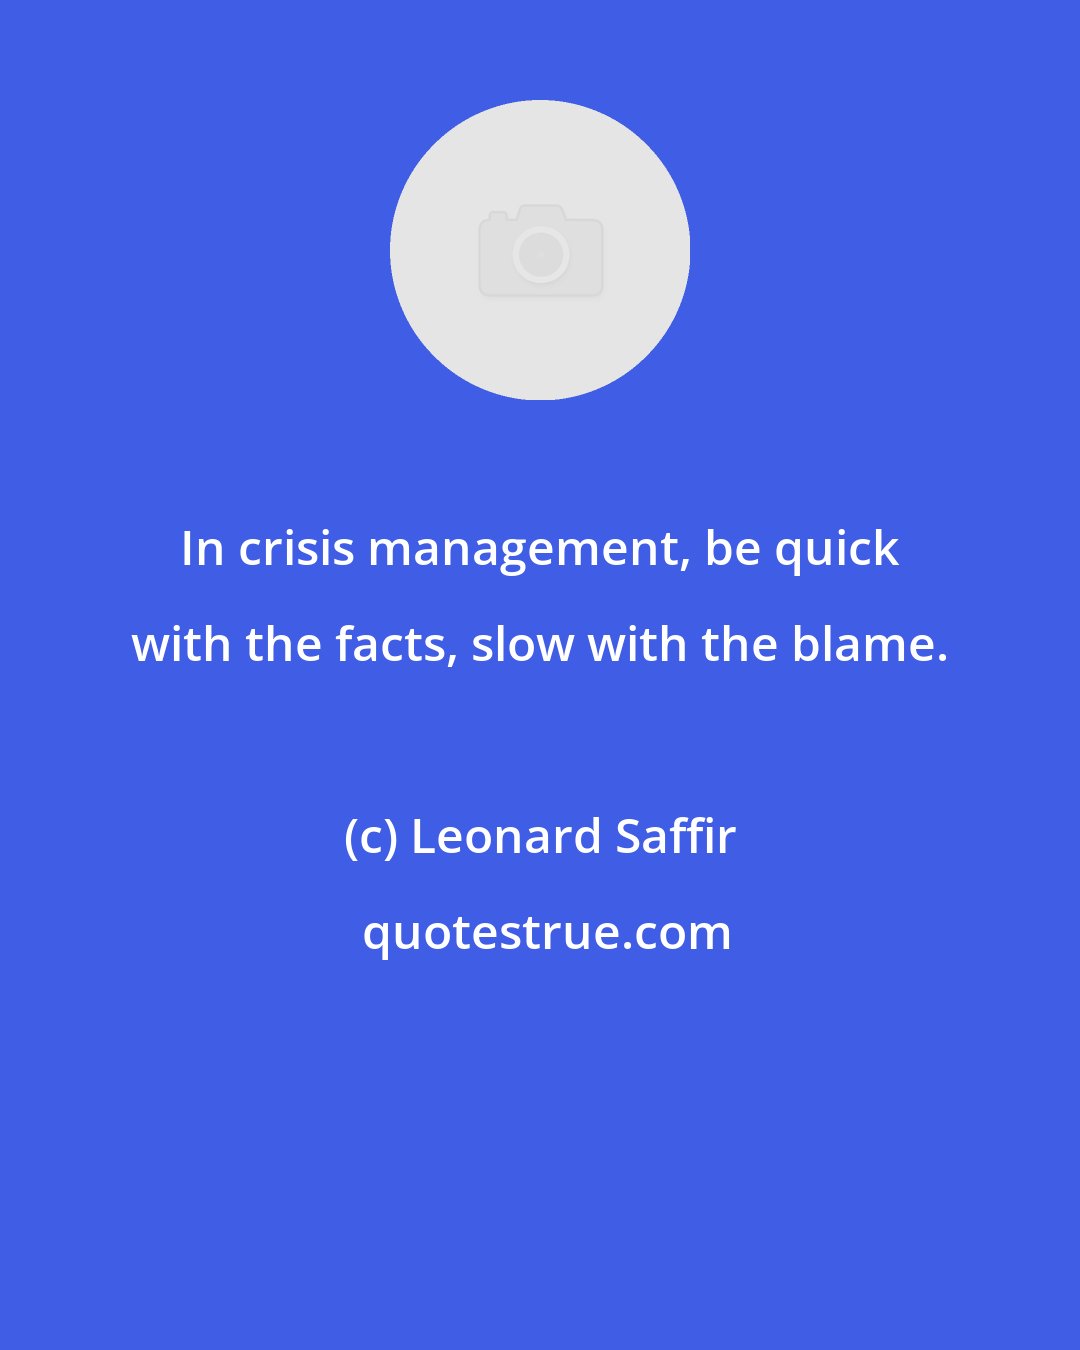 Leonard Saffir: In crisis management, be quick with the facts, slow with the blame.